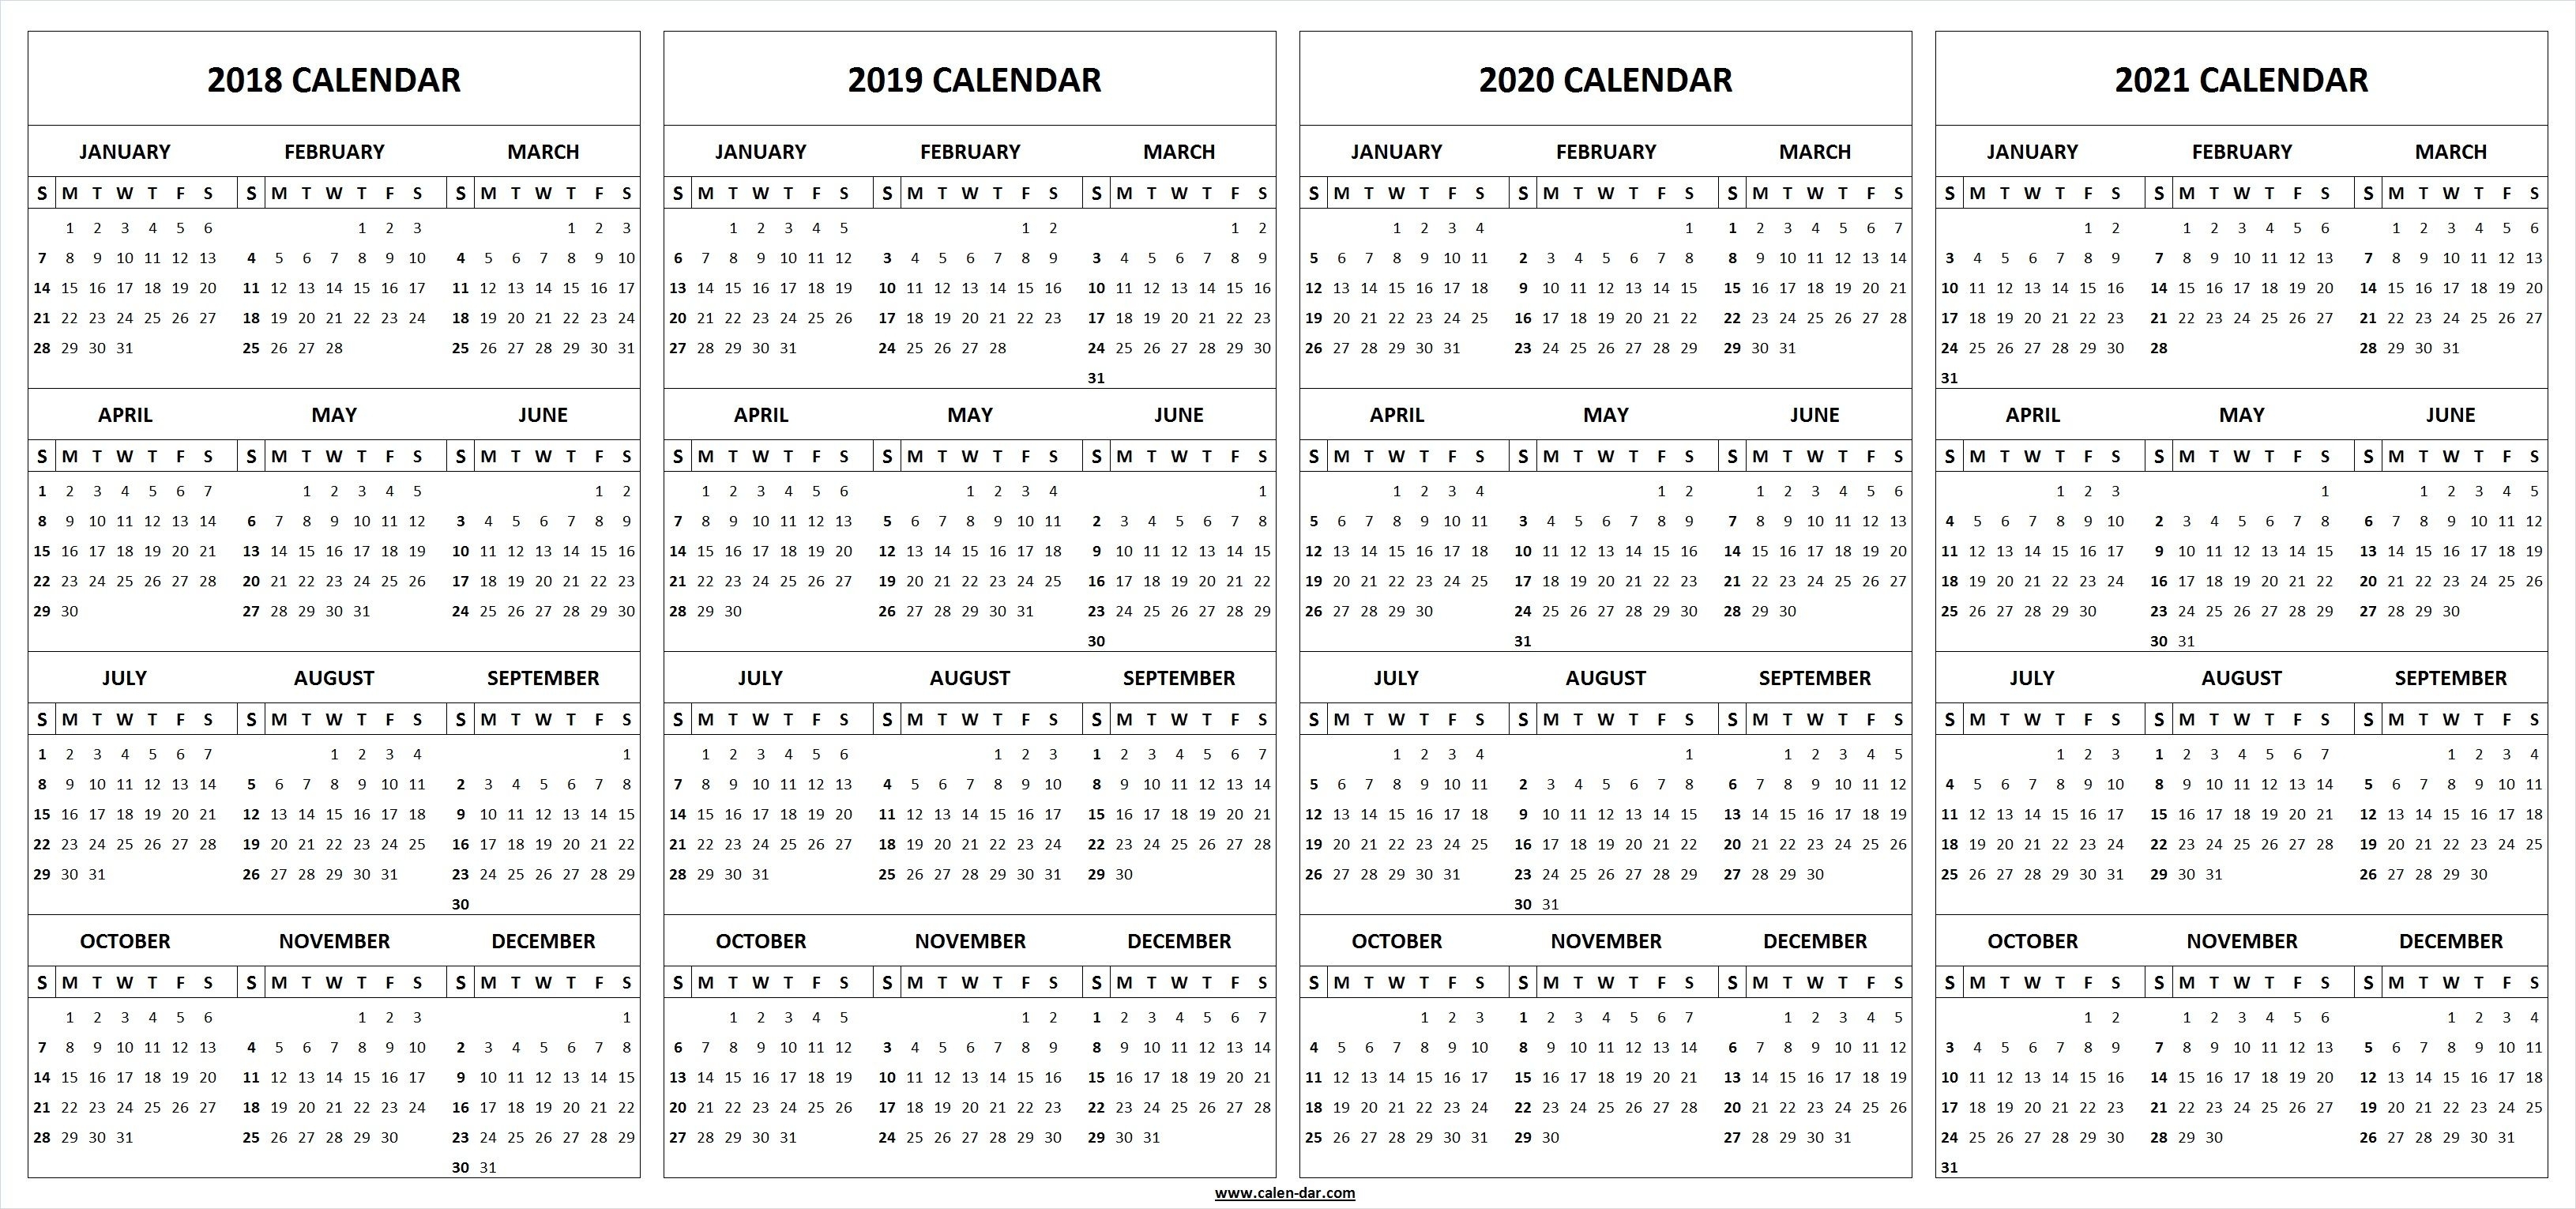 4 Four Year 2018 2019 2020 2021 Calendar Printable Template pertaining to Calendar Yearly 2019 2020 2021